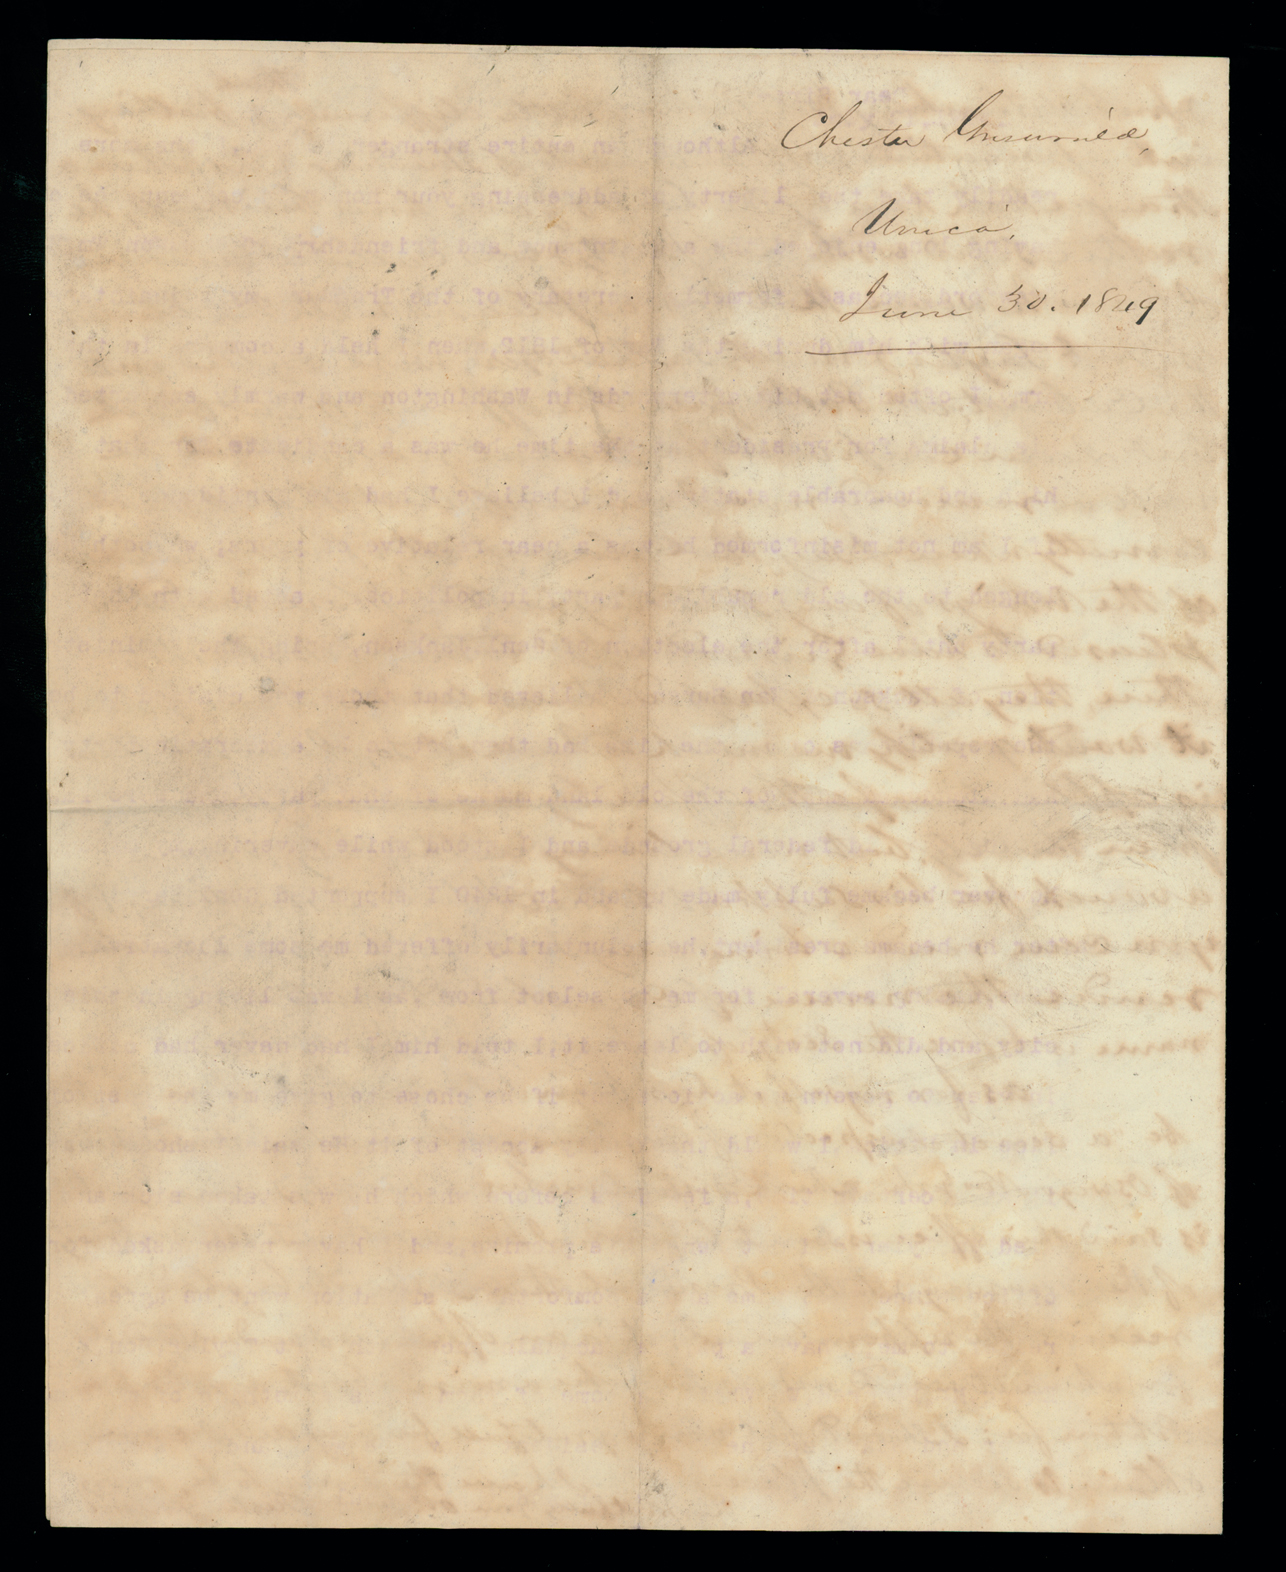 Letter, Chester Griswold, Utica, New York, to "Hon. W[illia]m. H. Crawford" [George W. Crawford], n. p., Page 4